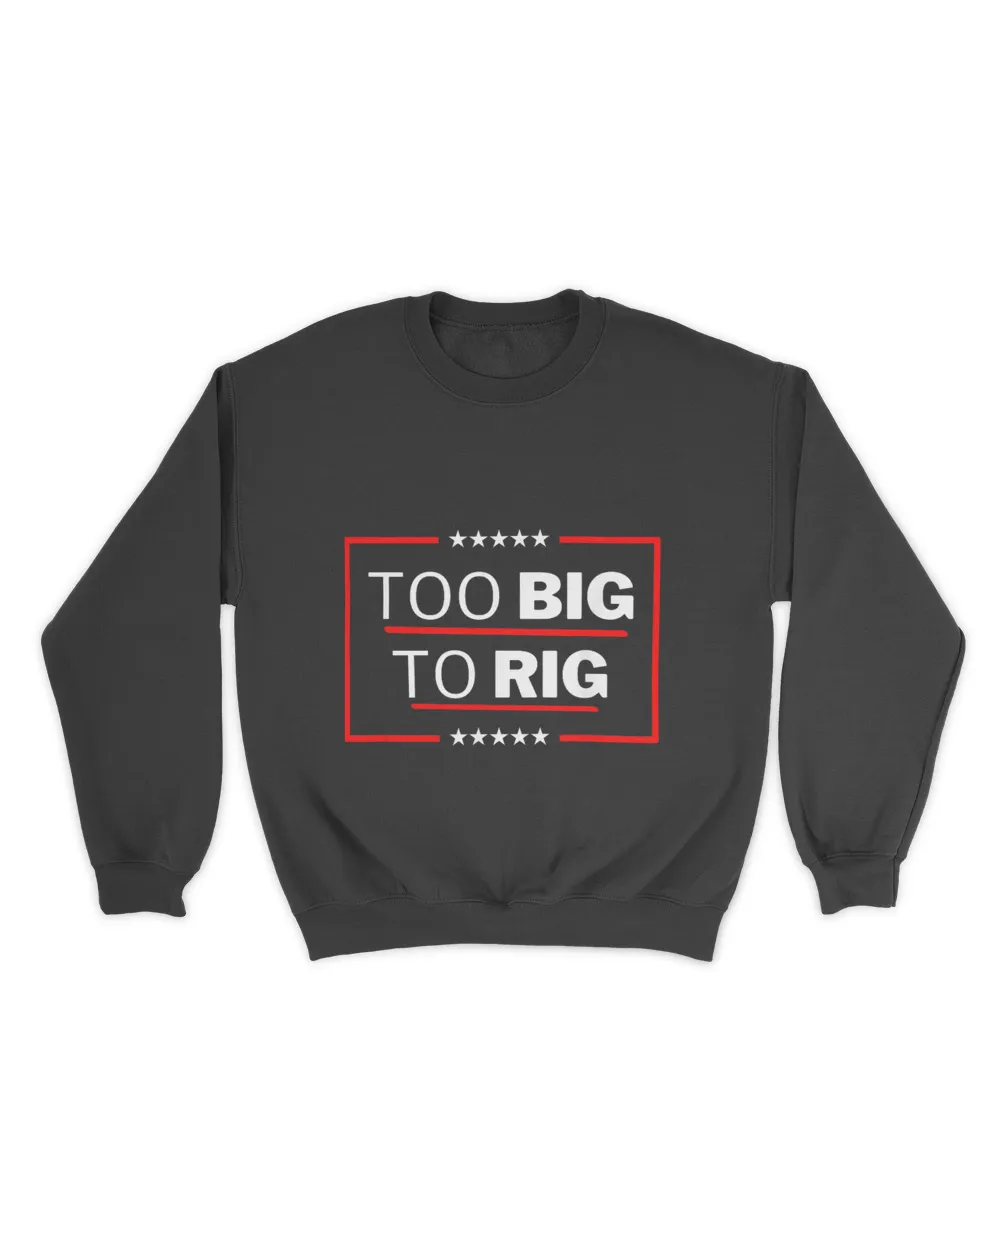 Too Big To Rig Saying Trump 2024 Funny Trump Quote T-Shirt